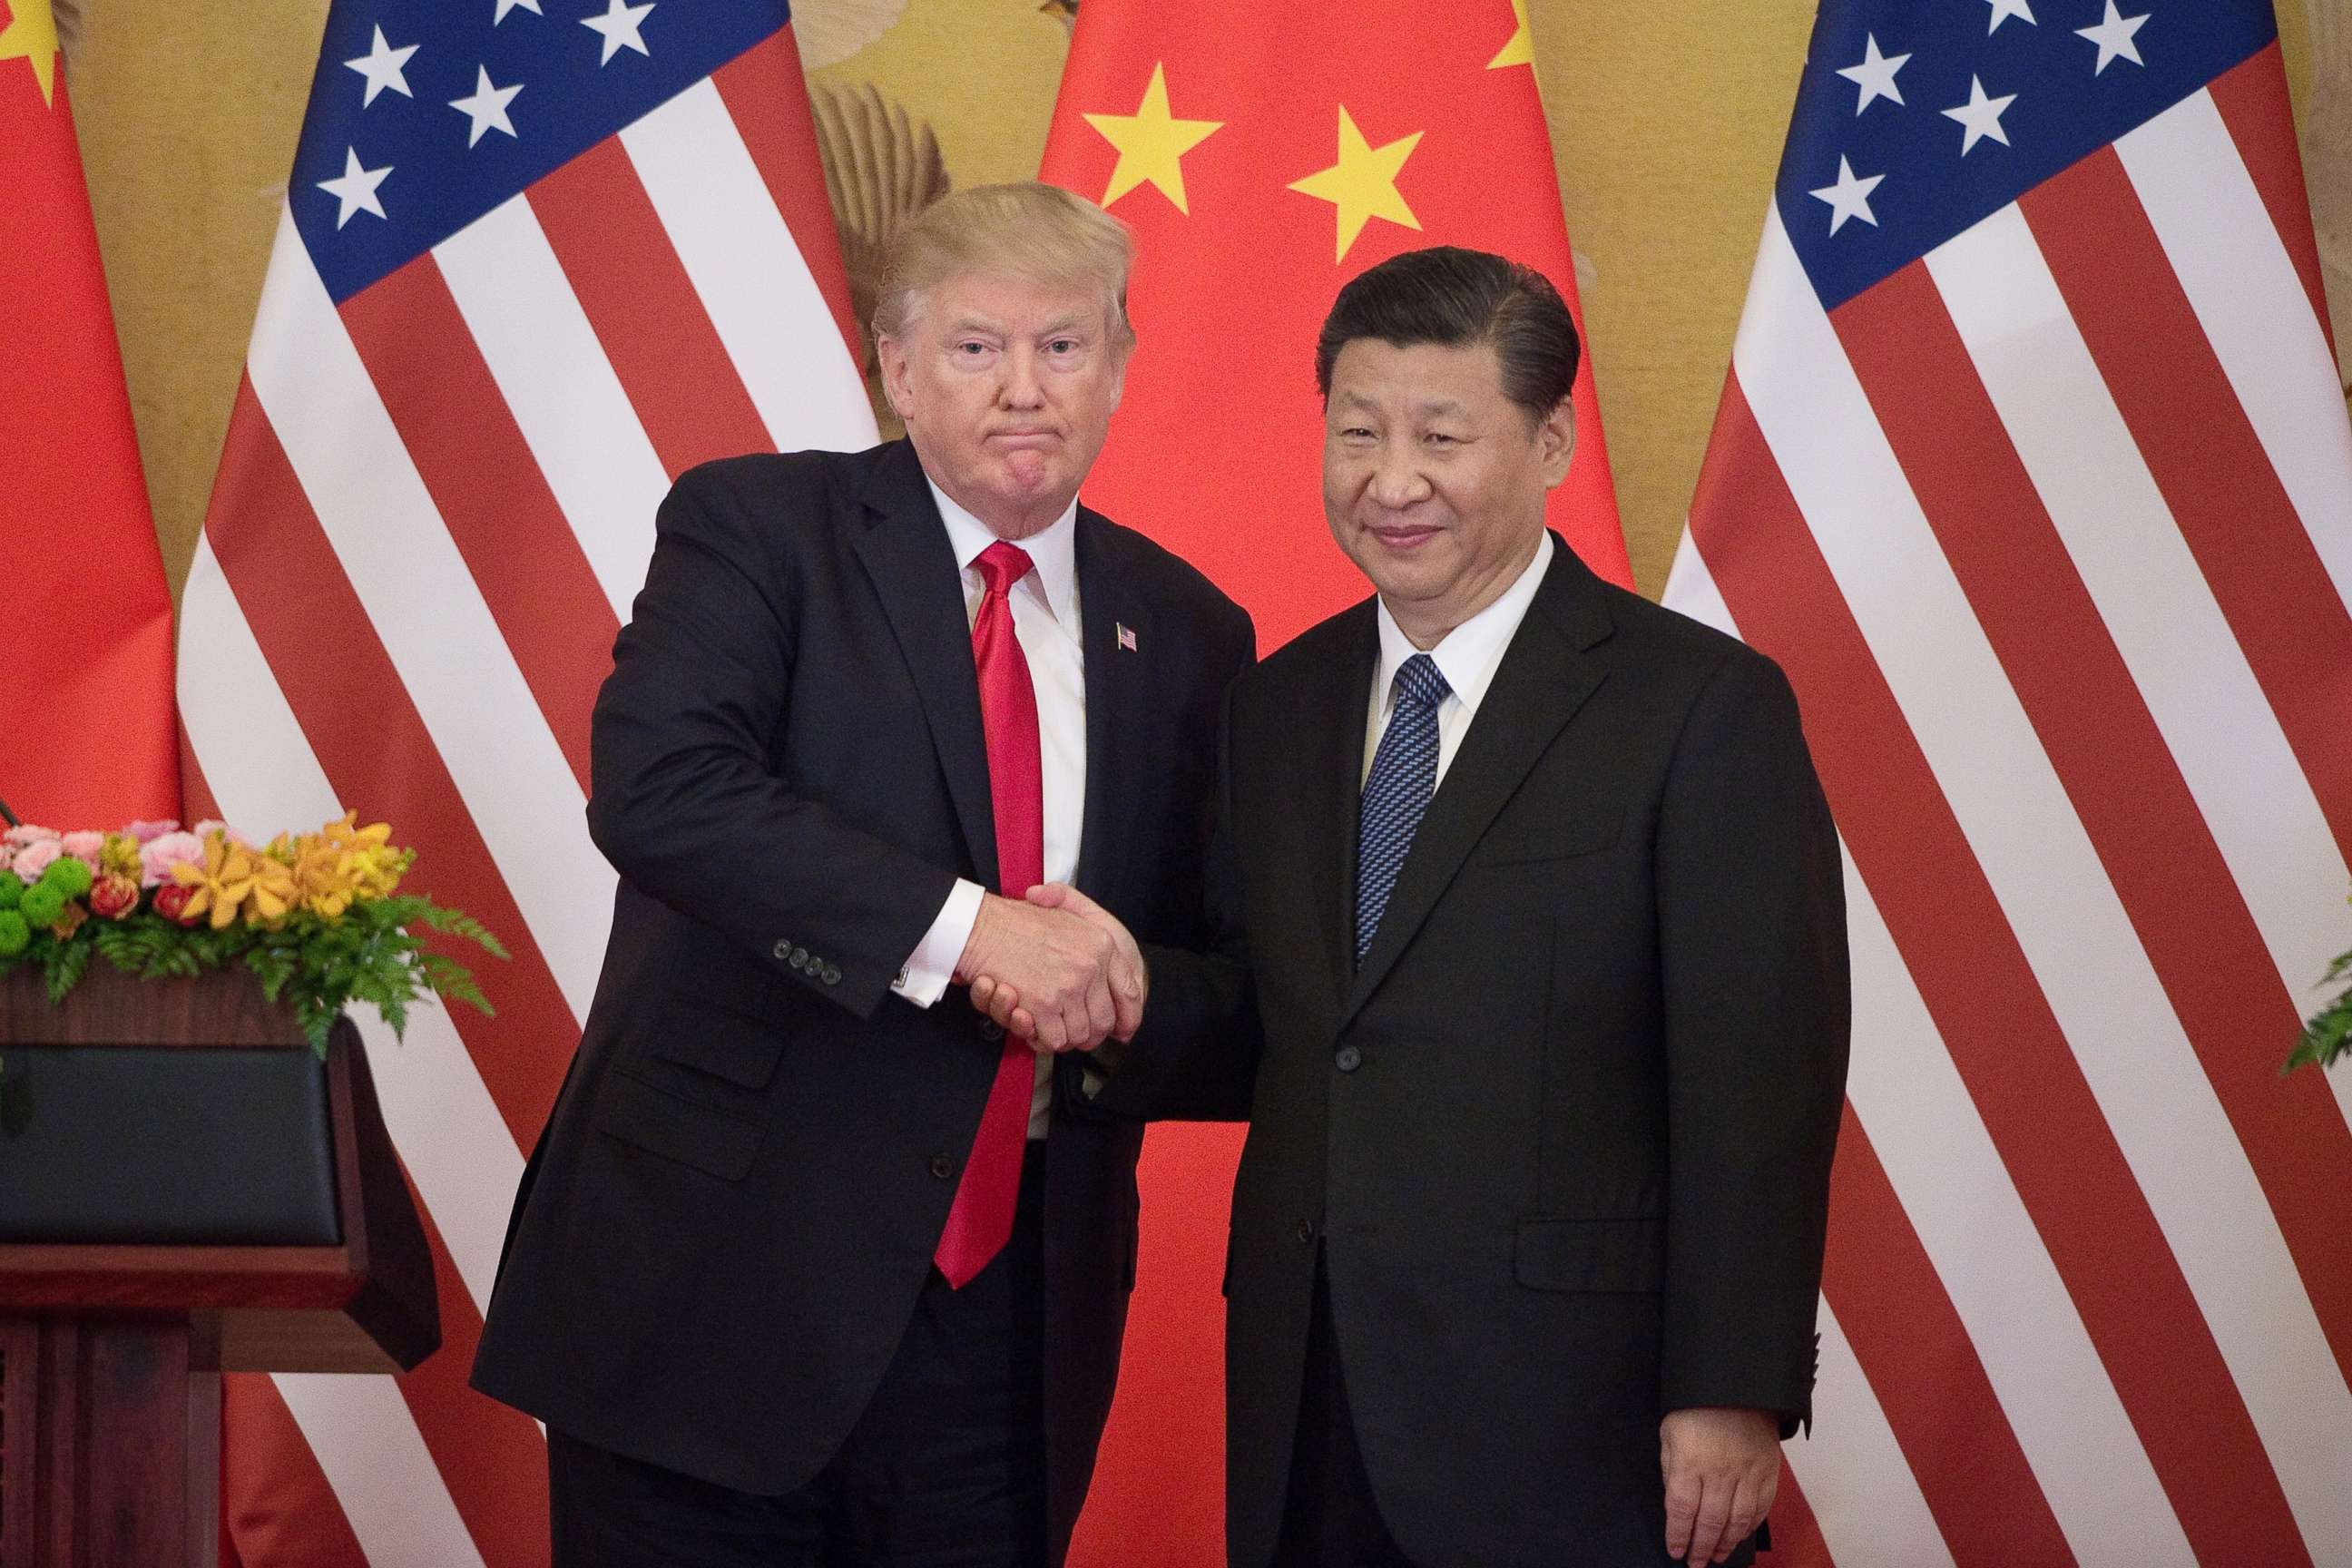 PHOTO: President Donald Trump shakes hands with China's President Xi Jinping during a press conference at the Great Hall of the People in Beijing on Nov. 9, 2017. 